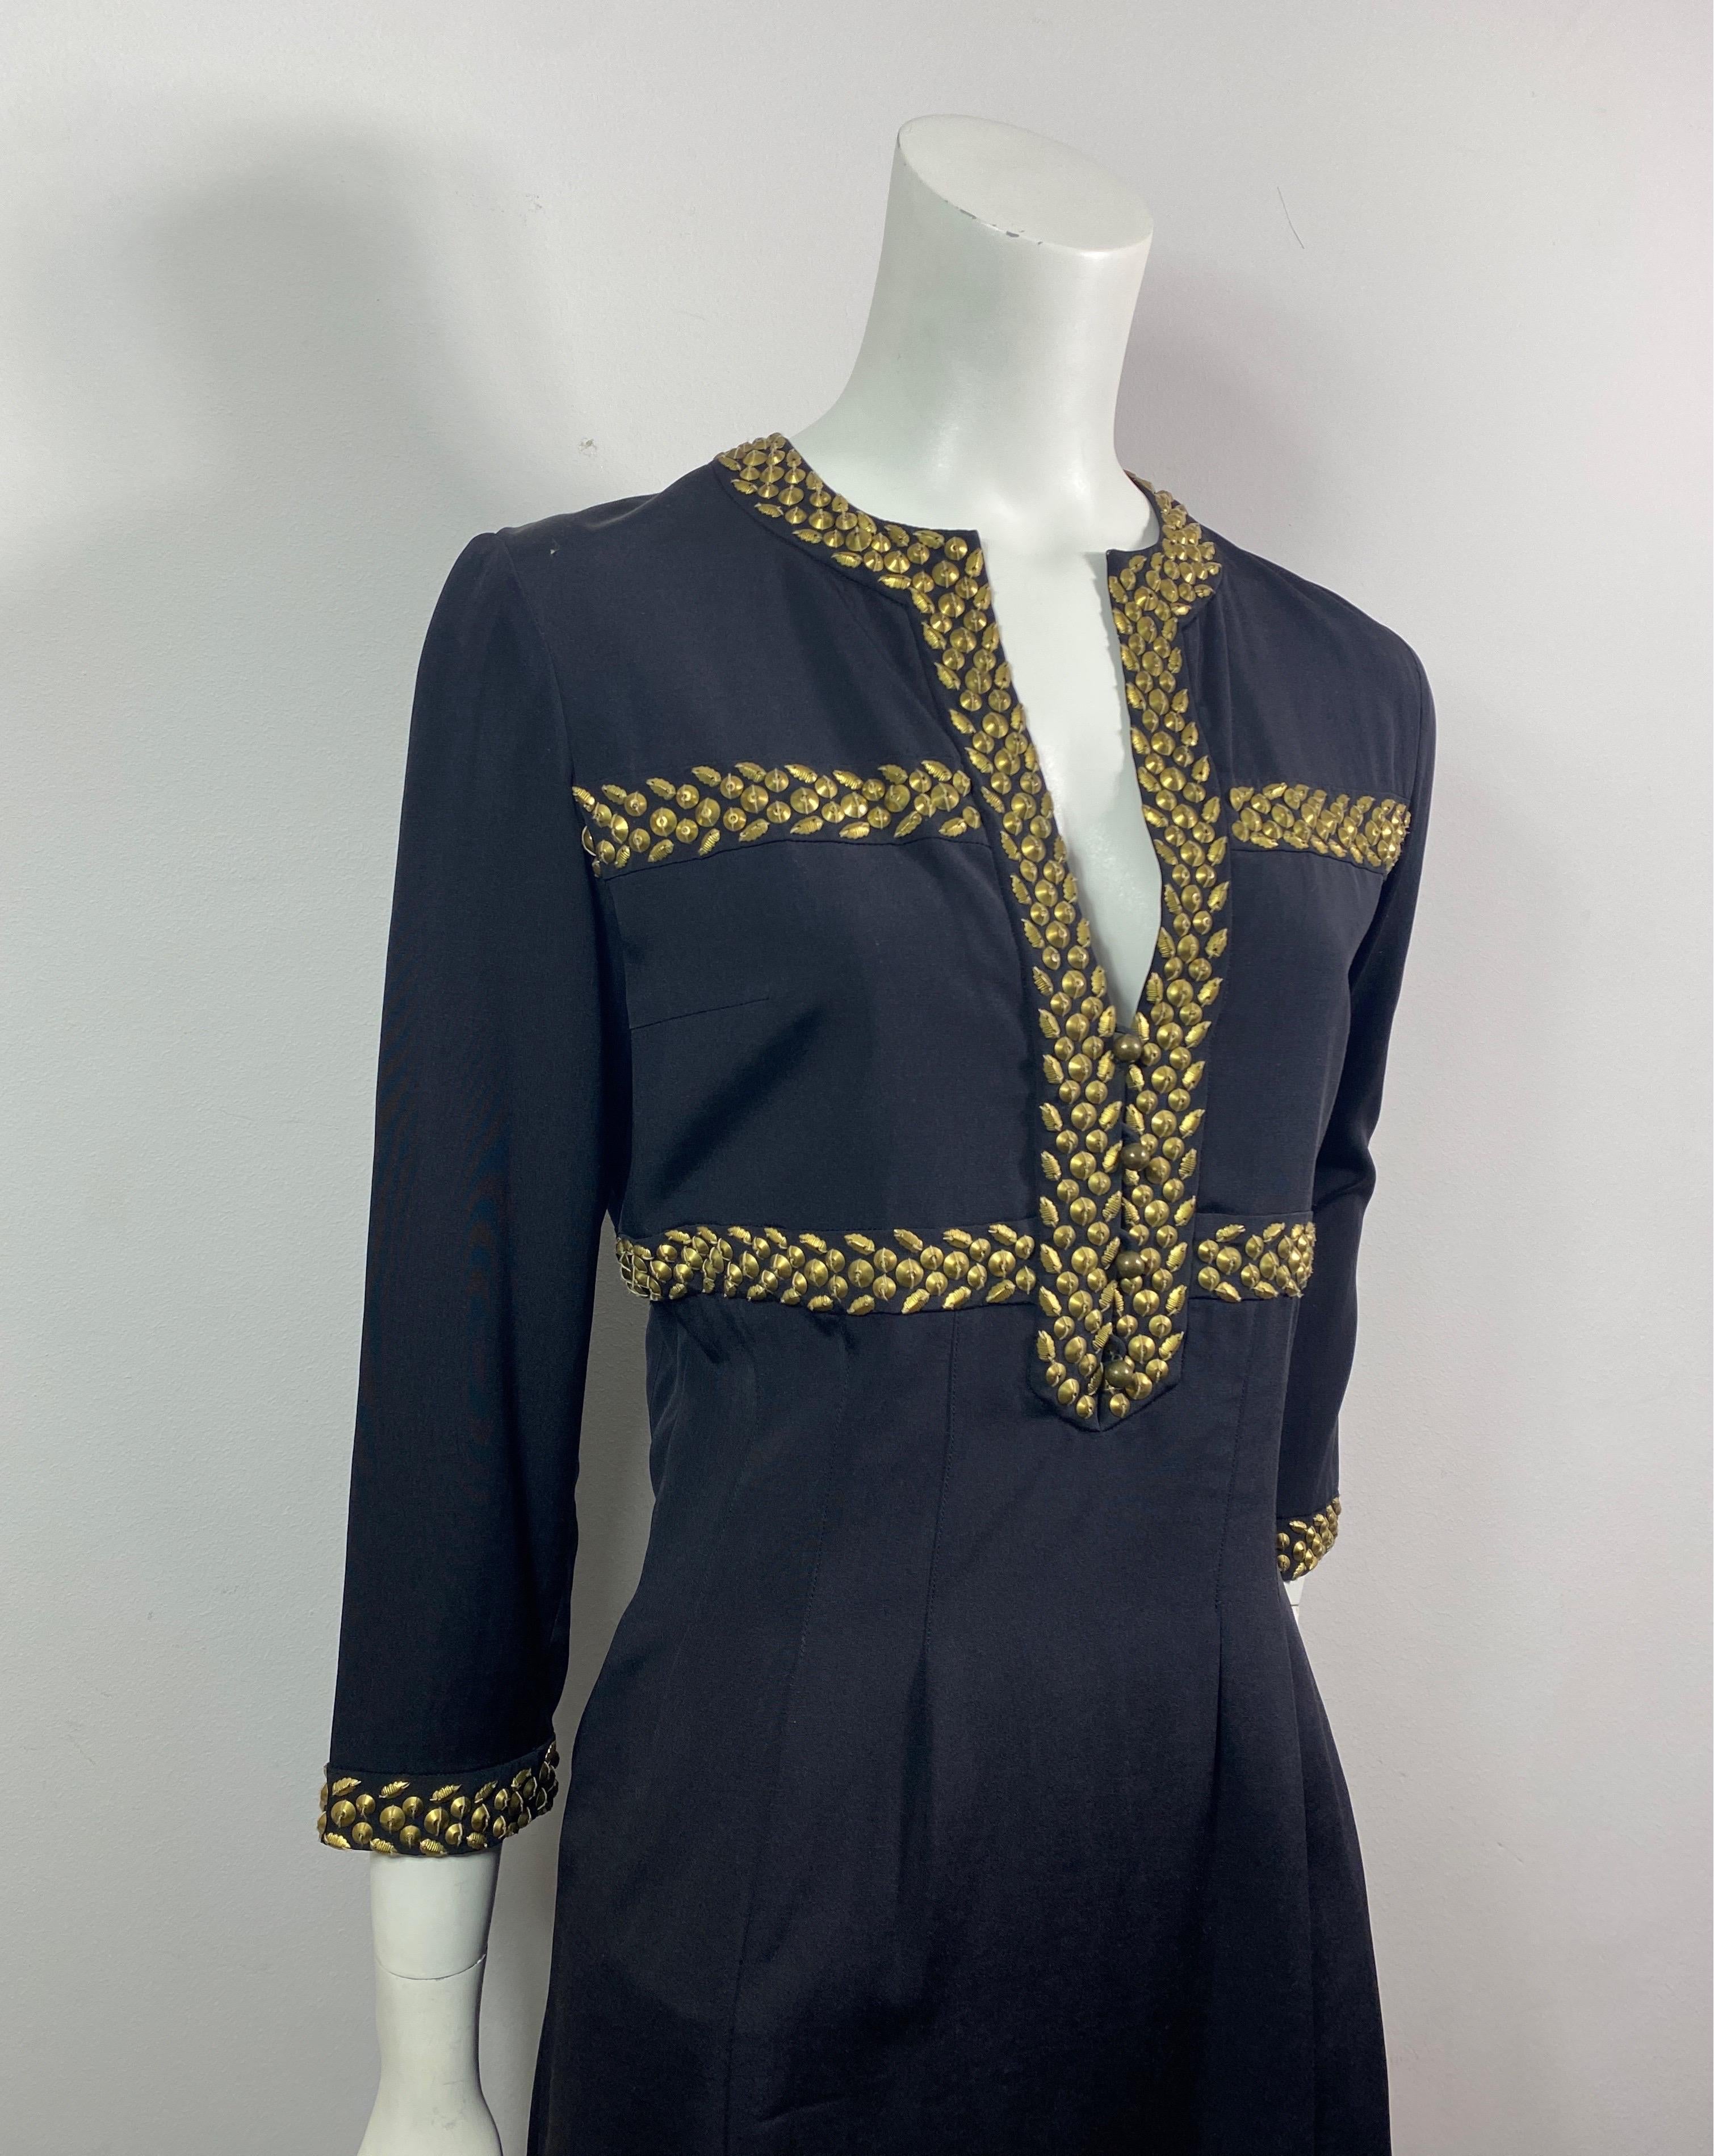 Chloe Spring 2003 Bronze Embellished Black Dress - Size 36 In Good Condition For Sale In West Palm Beach, FL